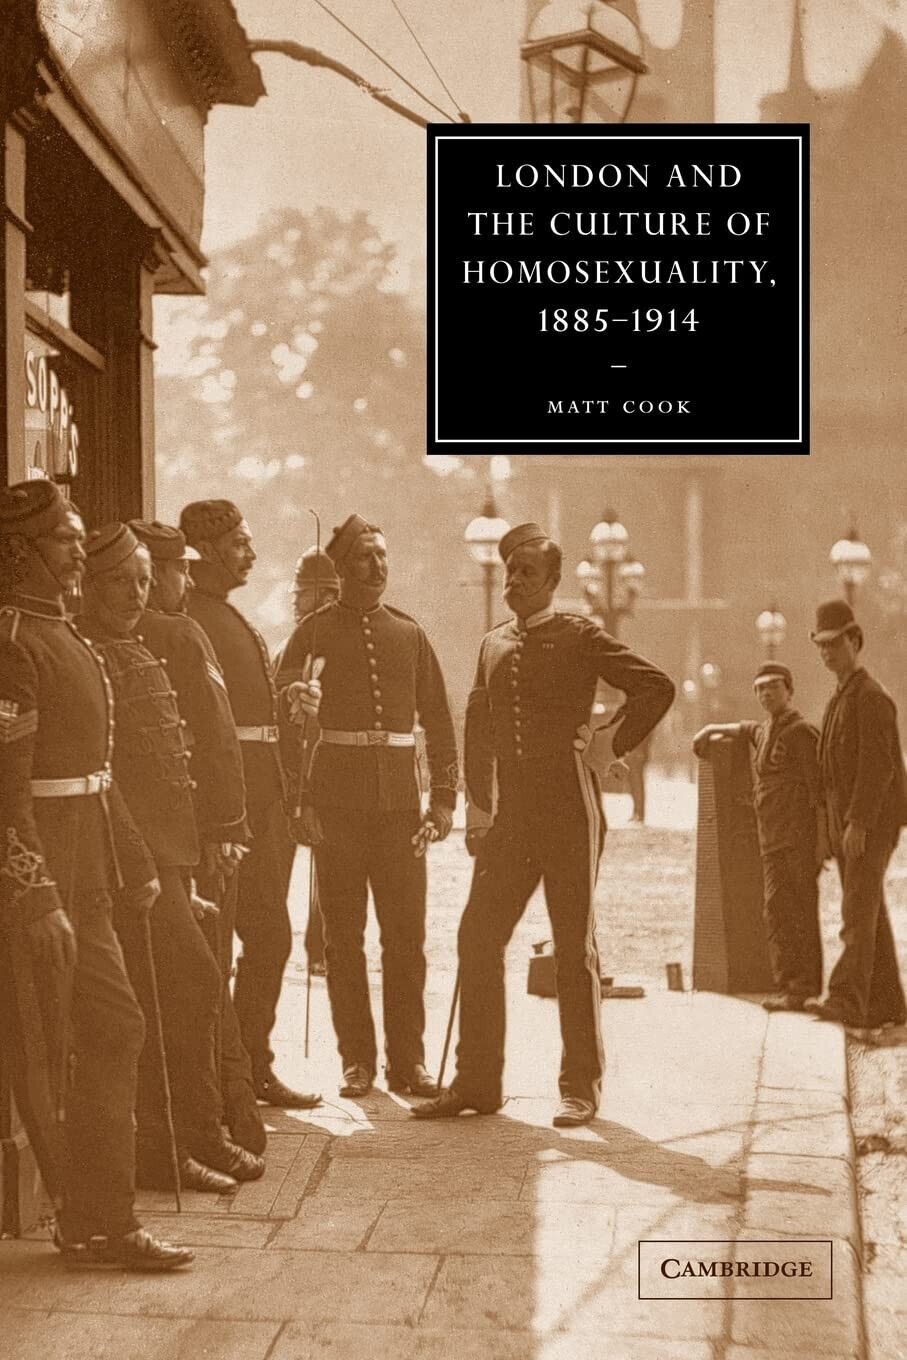 London and the Culture of Homosexuality, 1885 1914 - Matt Cook - 2022